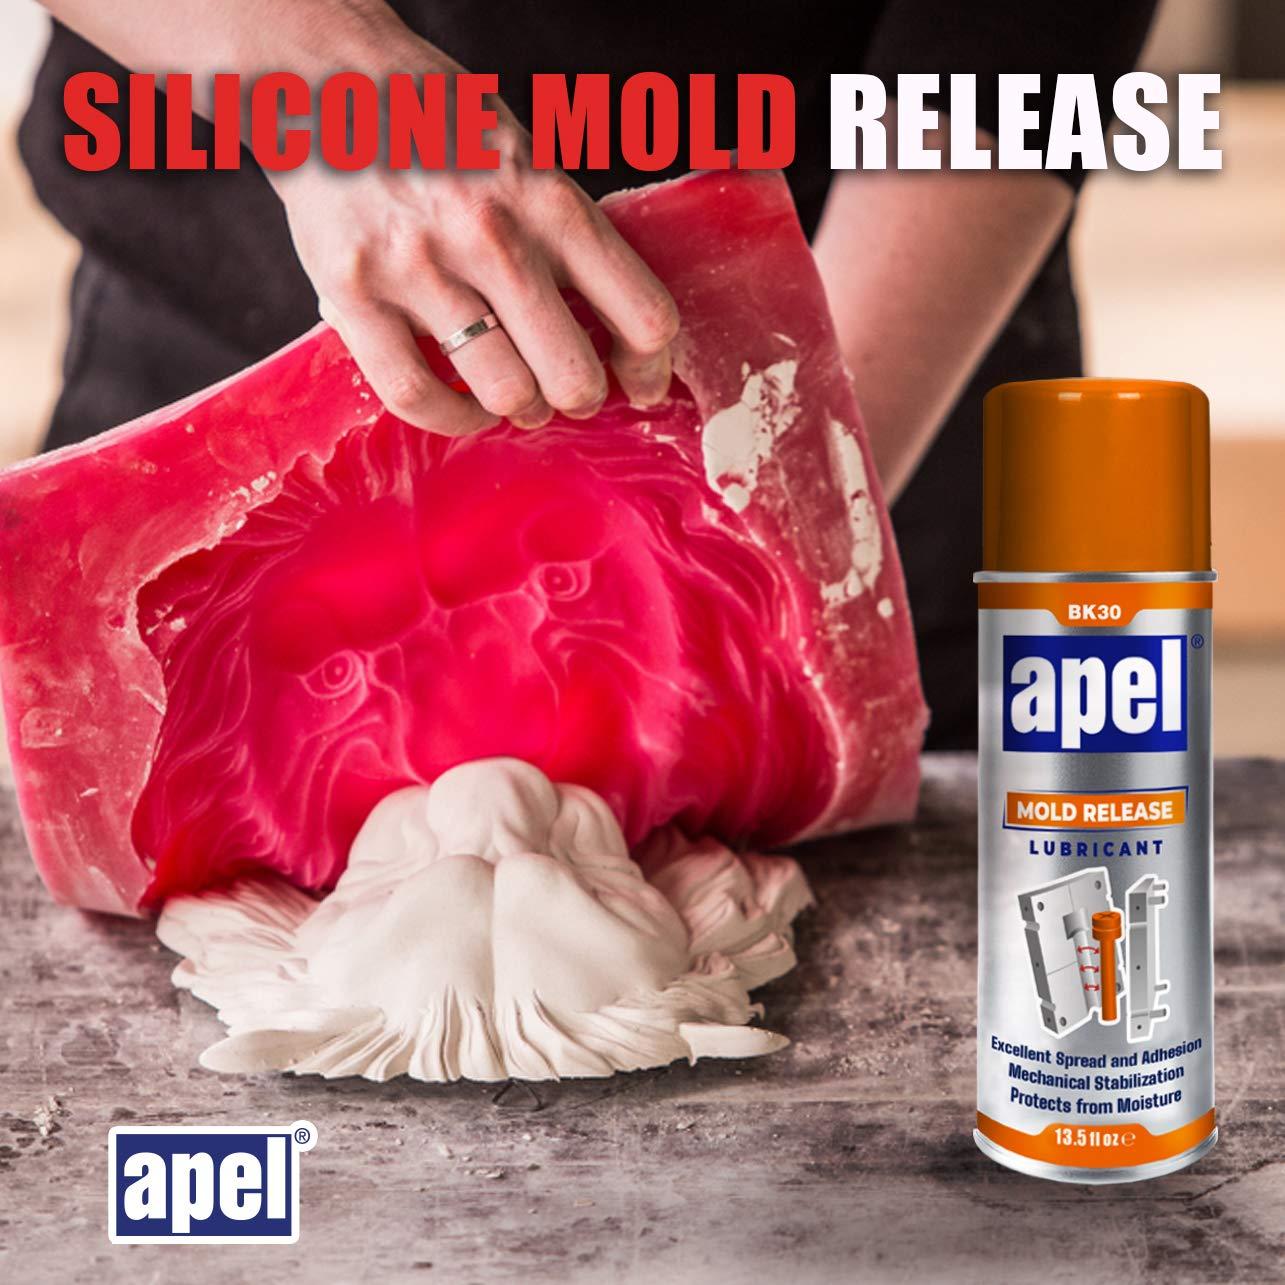 mold release spray for resin Silicone Spray & Release Agent Made In USA